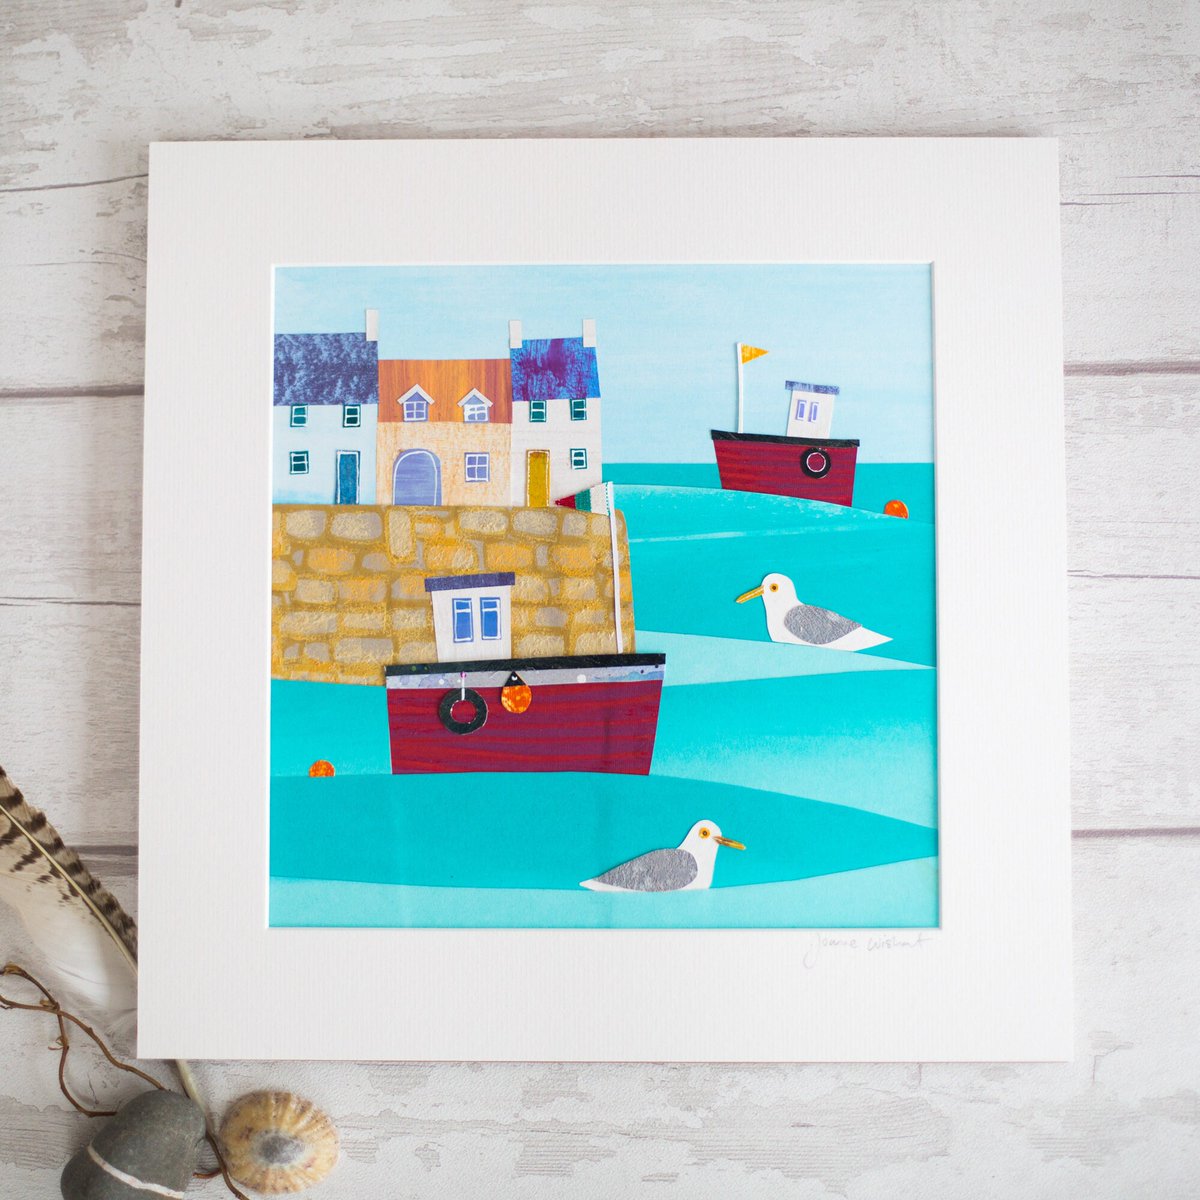 Newly listed in my Etsy shop. Look out for more of these cute collages over the course of the week.
etsy.me/2XHmhL7 #cuteharbour #kidswallart #seasidepicture